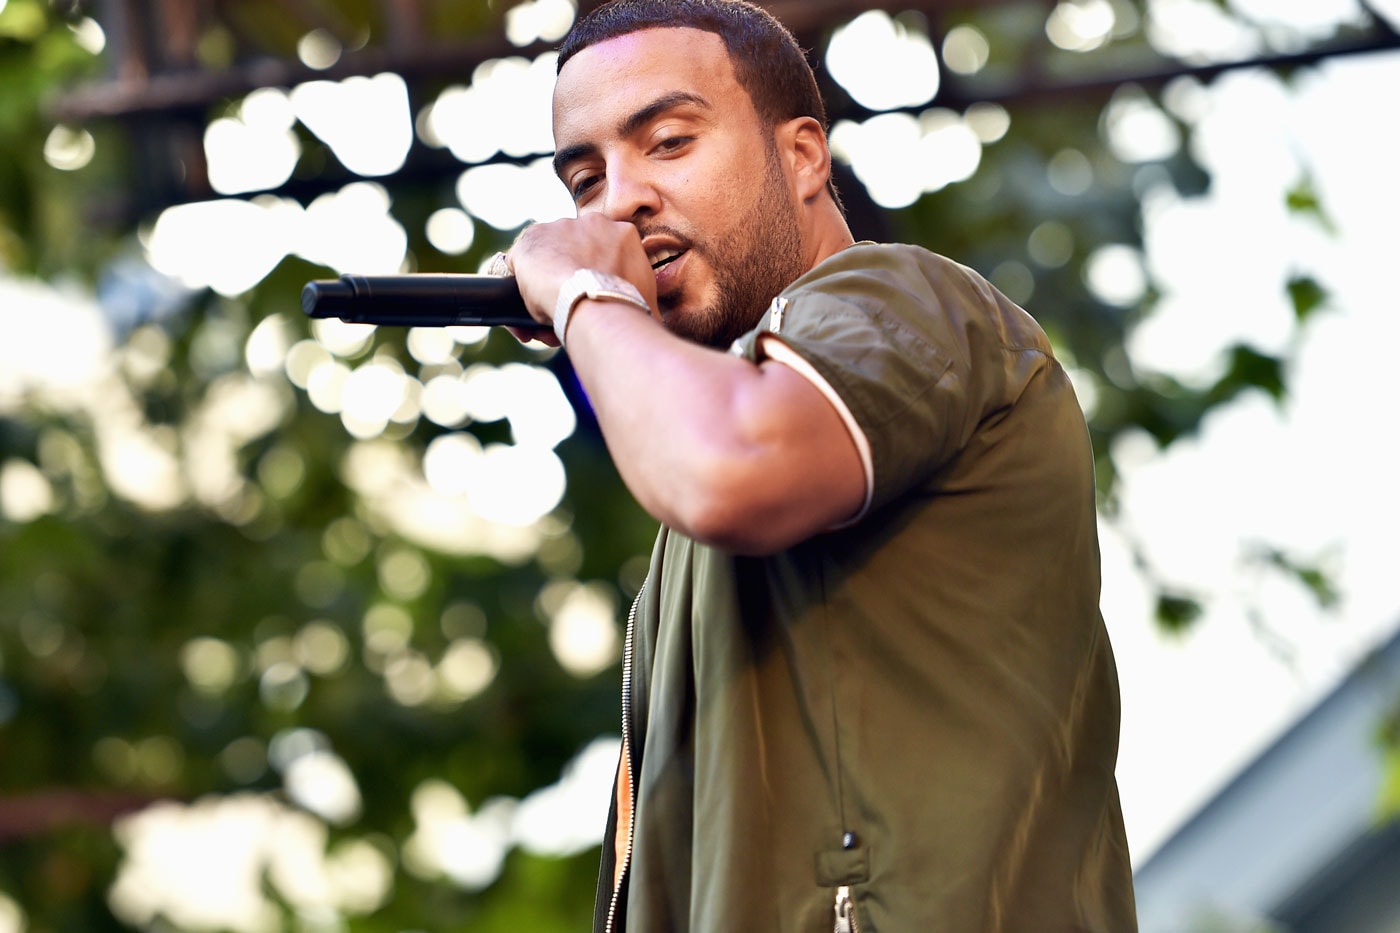 French Montana & Max B Are Going to Start a New Label, 'MC4' is Cancelled